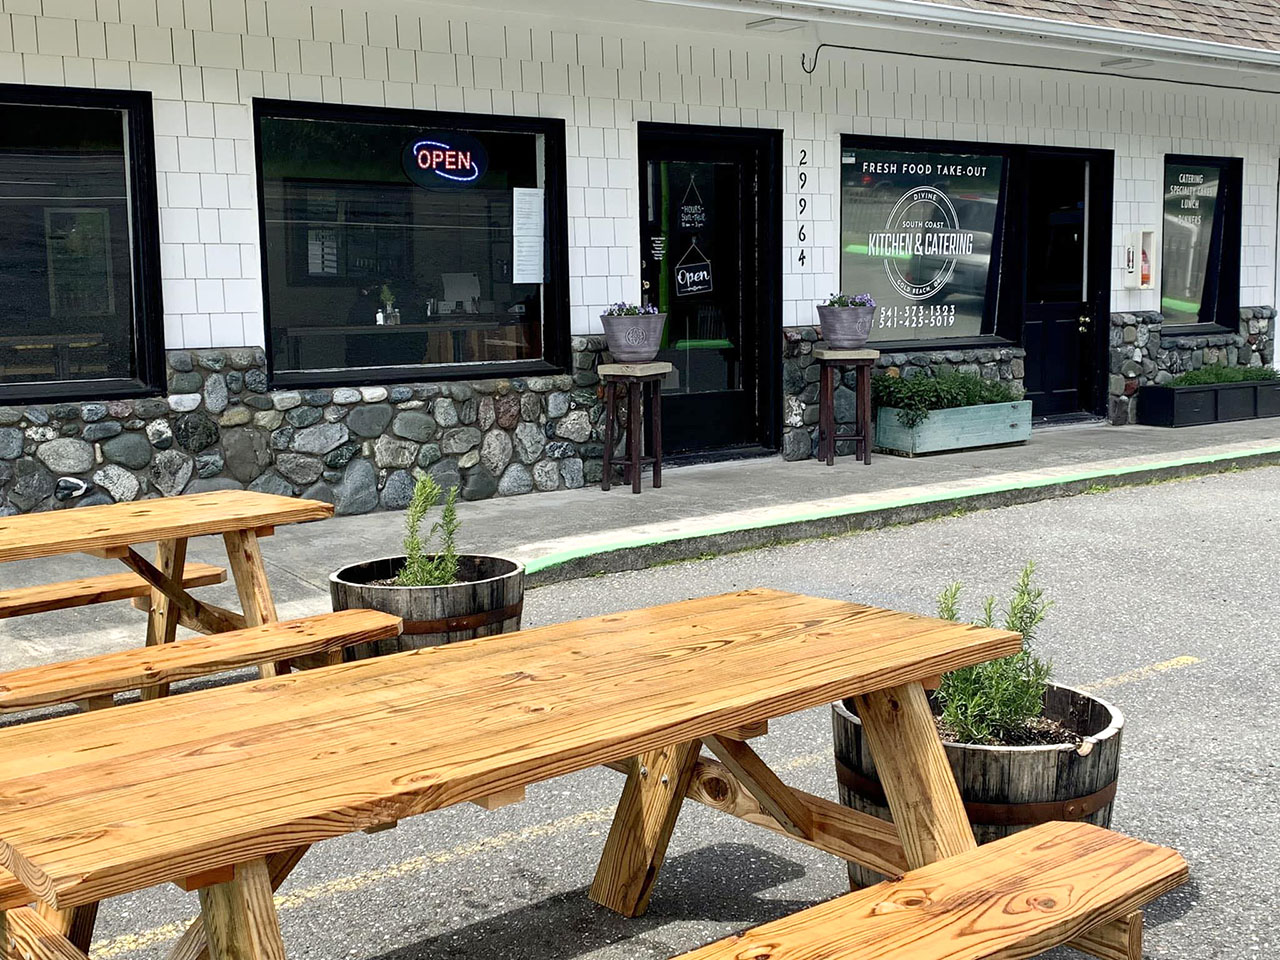 Exterior of restaurant at Divine South Kitchen and Catering in Gold Beach, Oregon